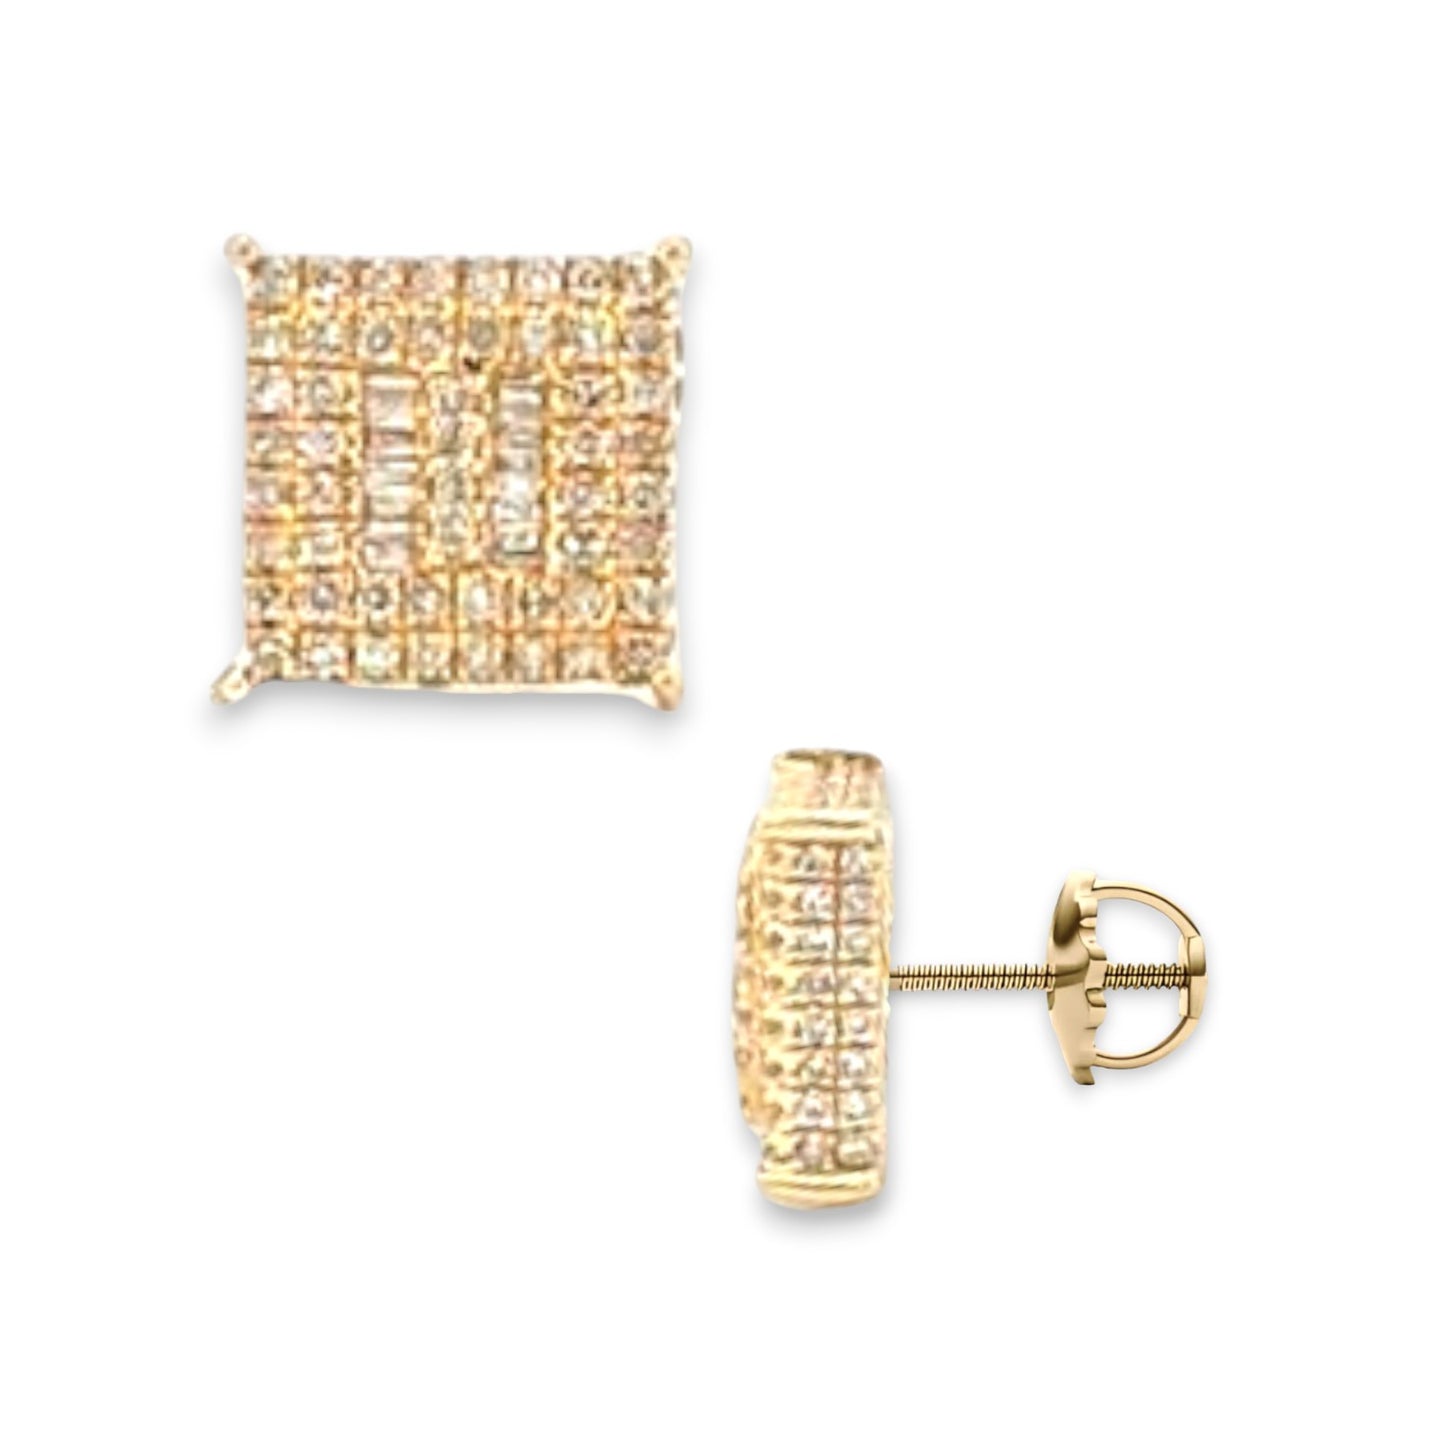 1.21ct Diamond Baguette and Round Stud Earrings - 14k Yellow Gold